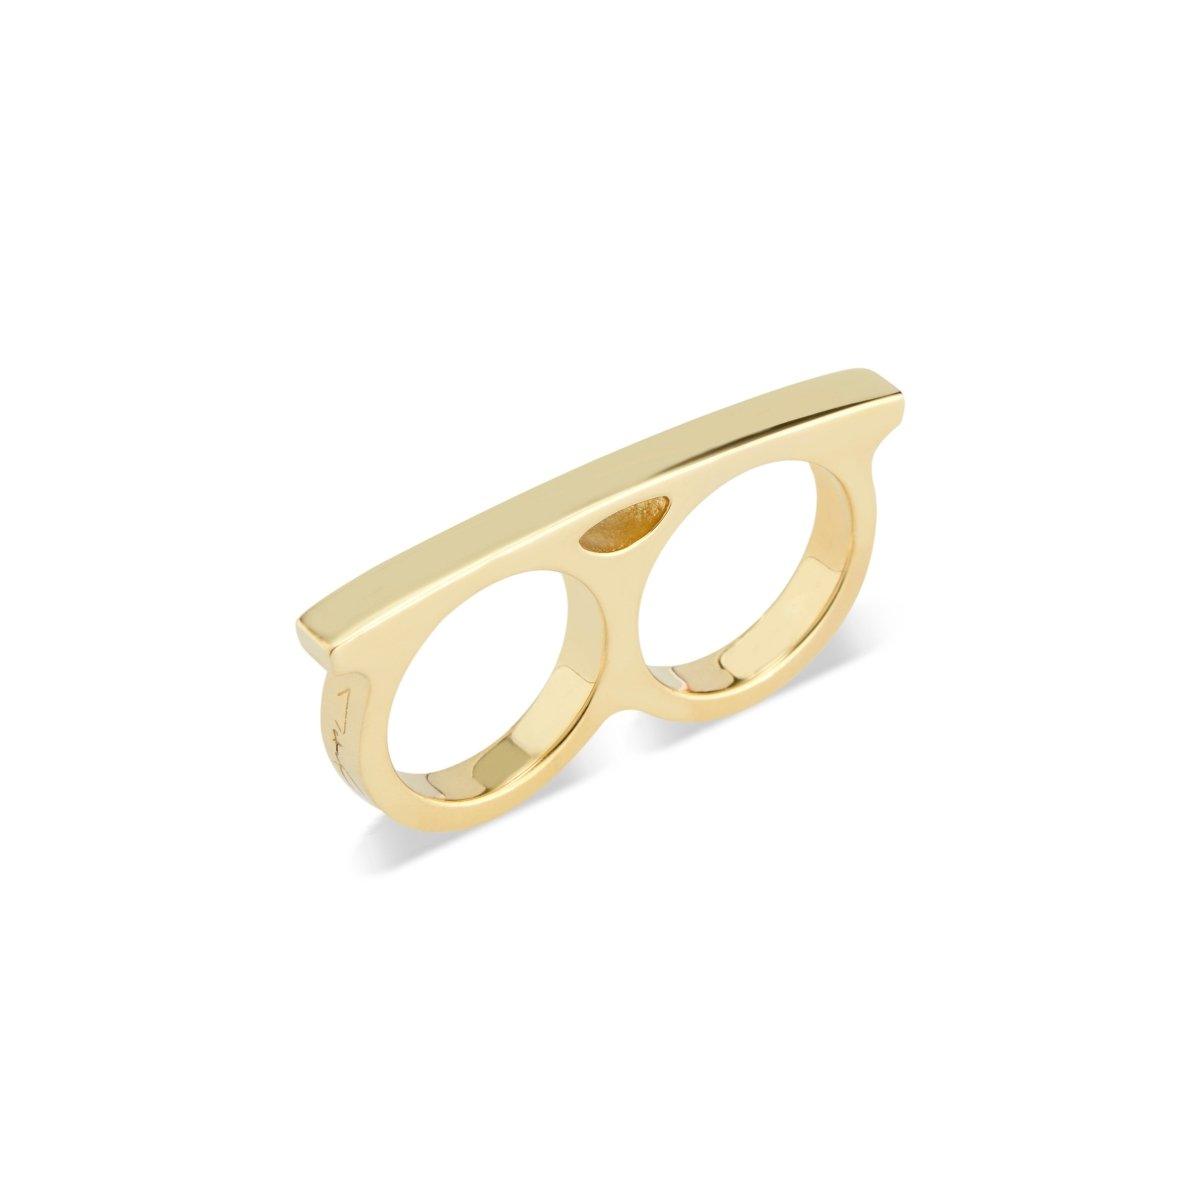 Flash Matchstick Ring - Nataly Aponte